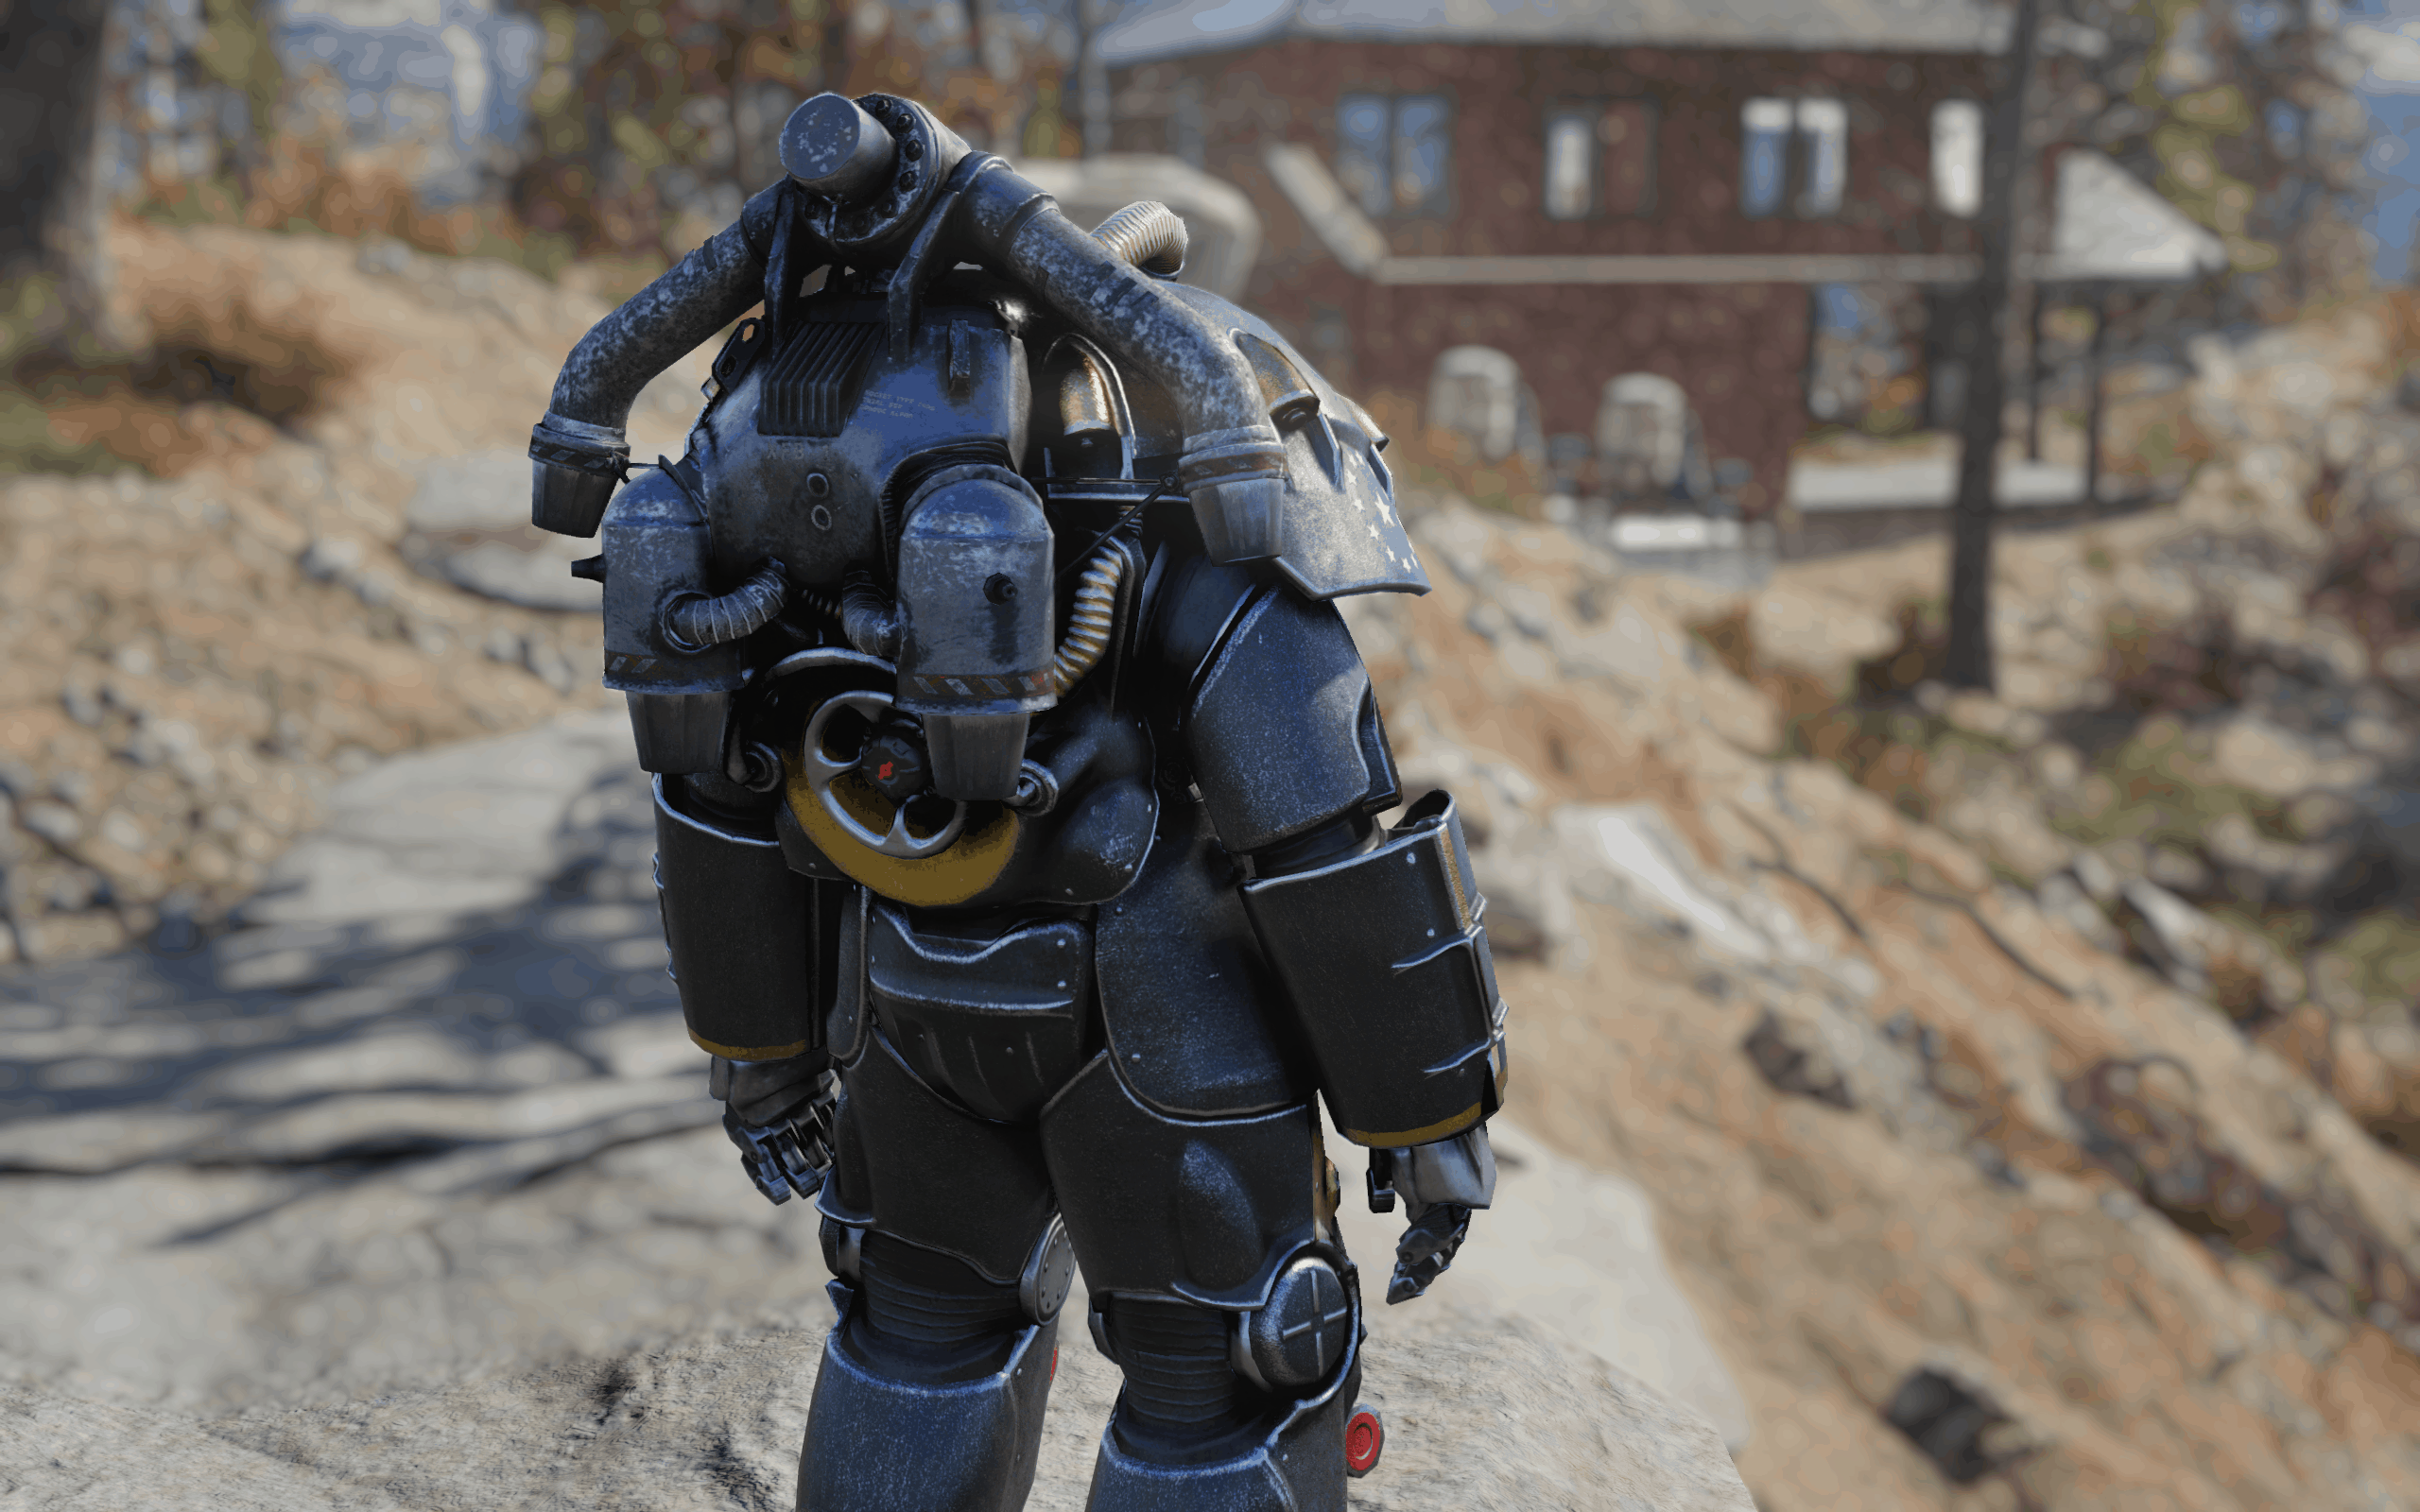 Power Armor Frame Fallout 76 free images, download Power Armor Frame Fa...